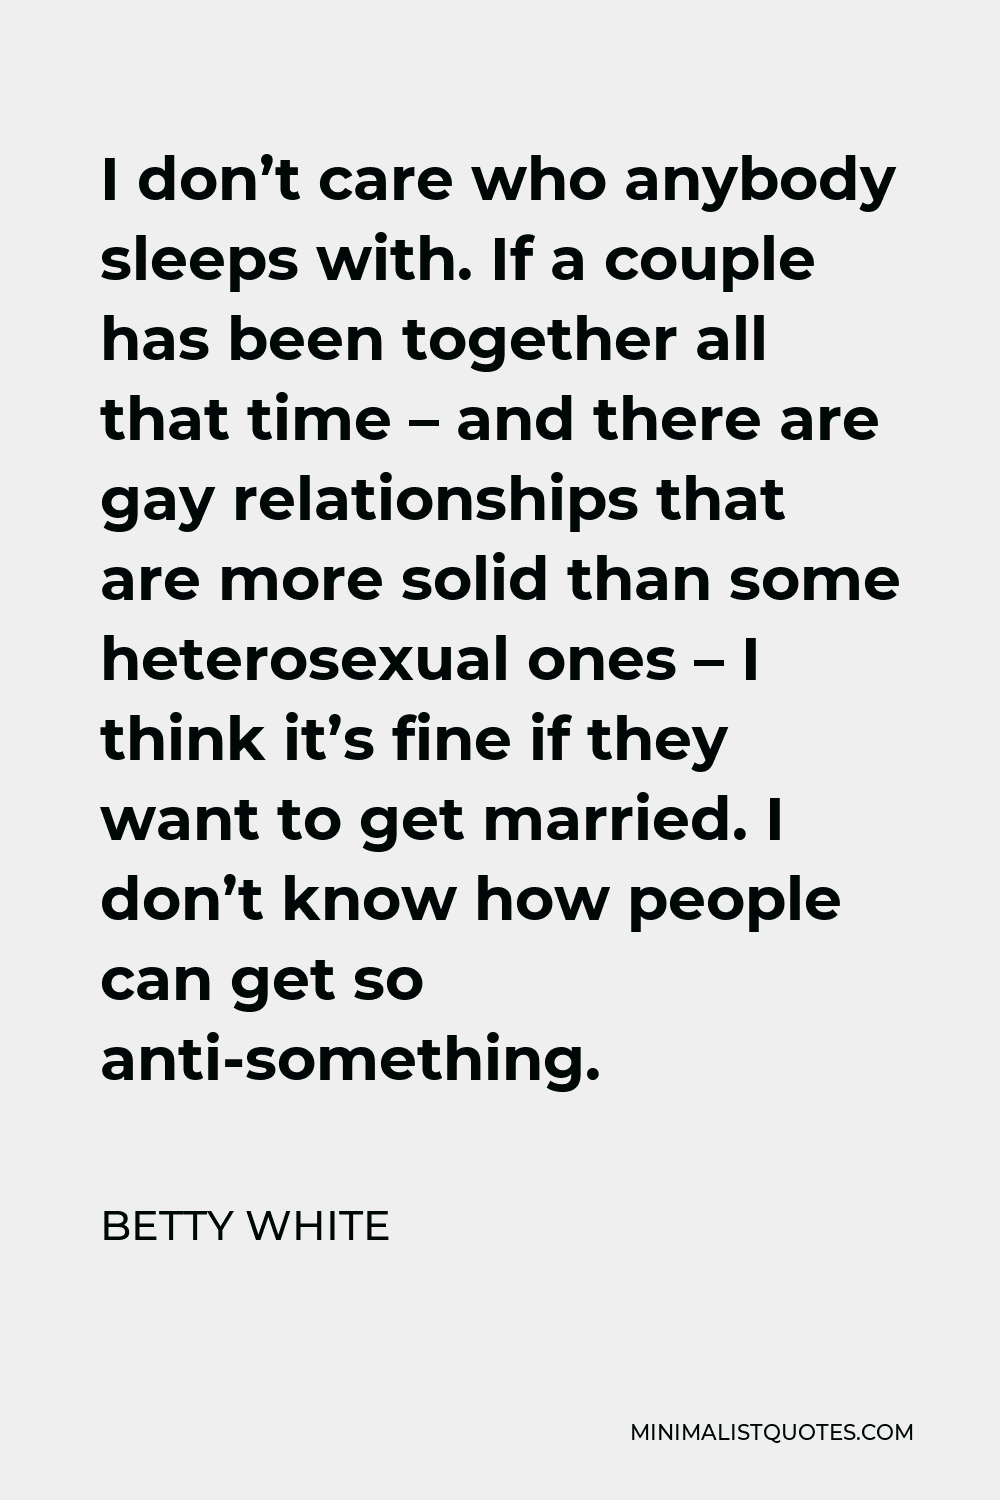 Betty White Quote - I don’t care who anybody sleeps with. If a couple has been together all that time – and there are gay relationships that are more solid than some heterosexual ones – I think it’s fine if they want to get married. I don’t know how people can get so anti-something.